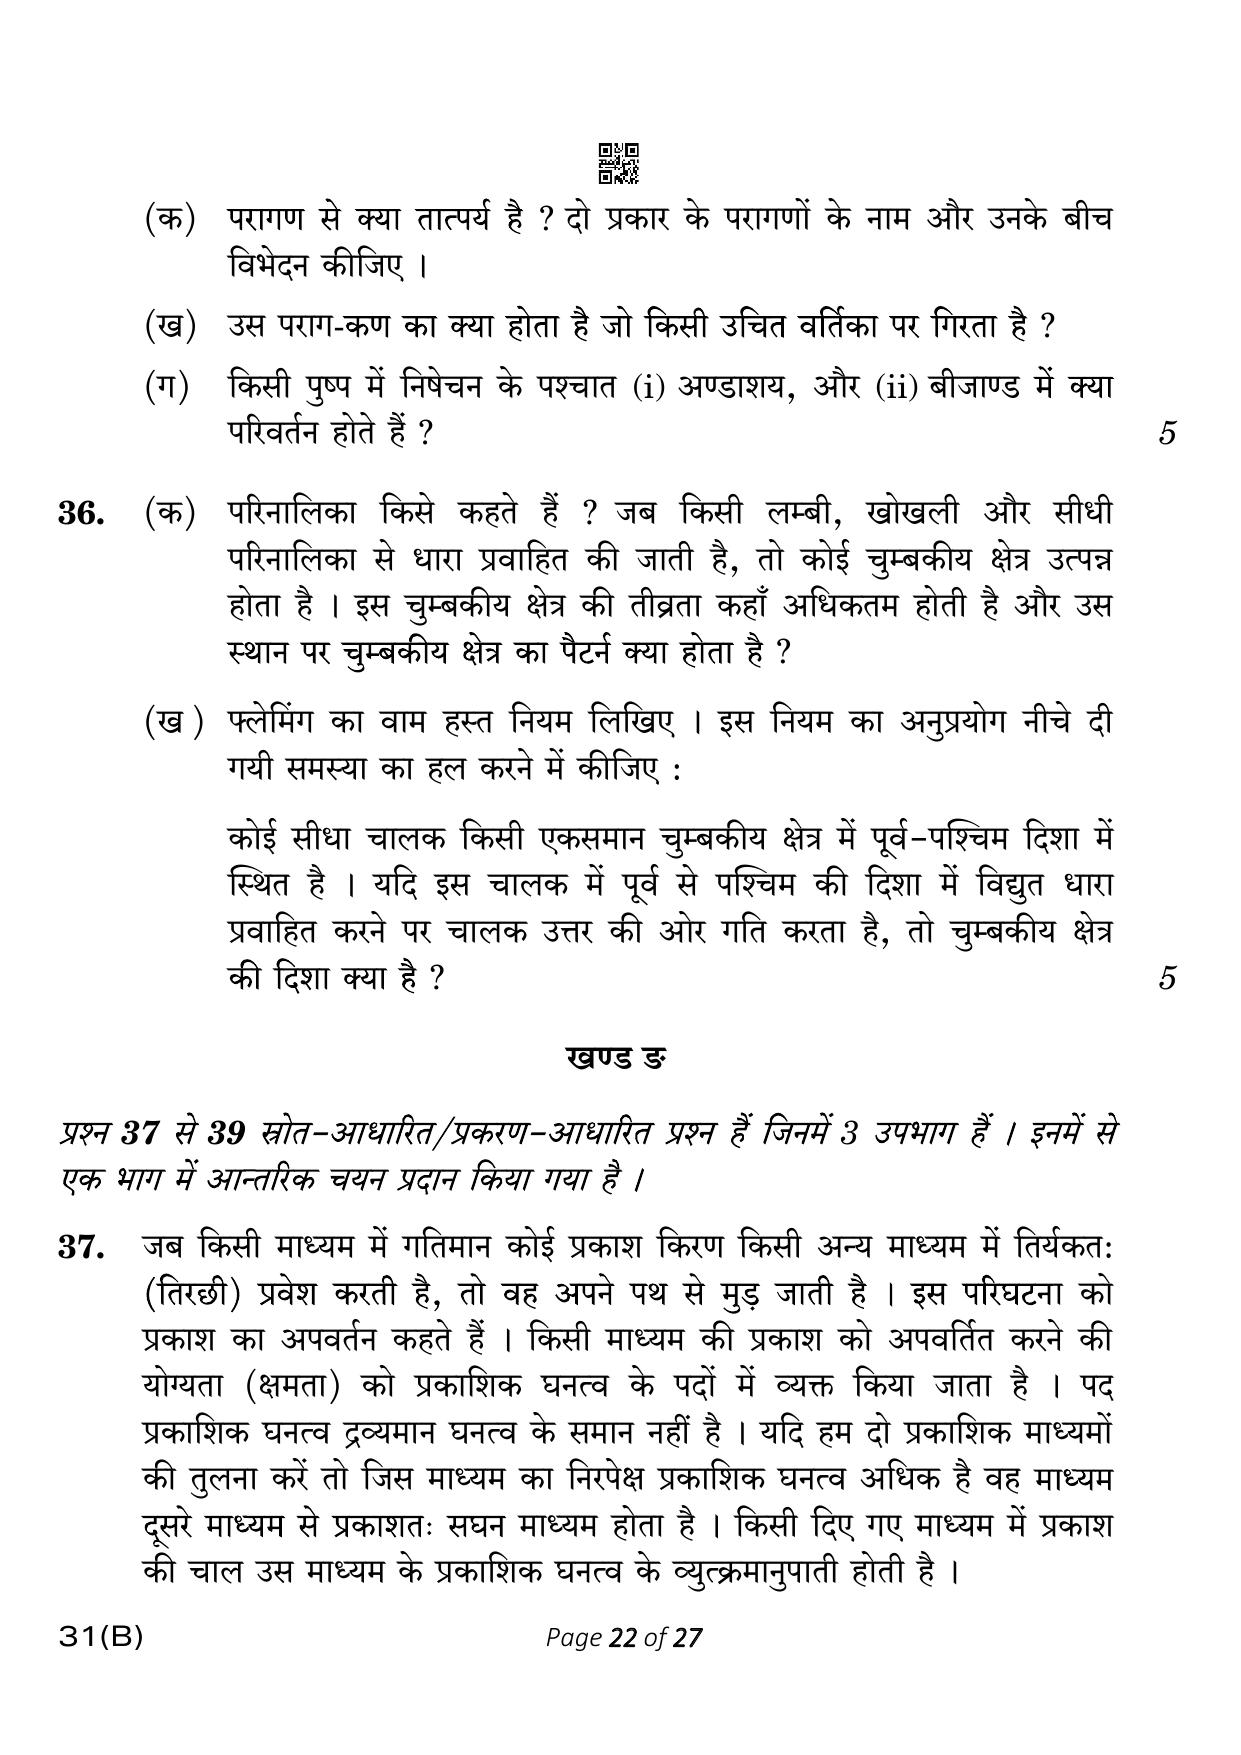 CBSE Class 10 31-B Science 2023 (Compartment) Question Paper - Page 22